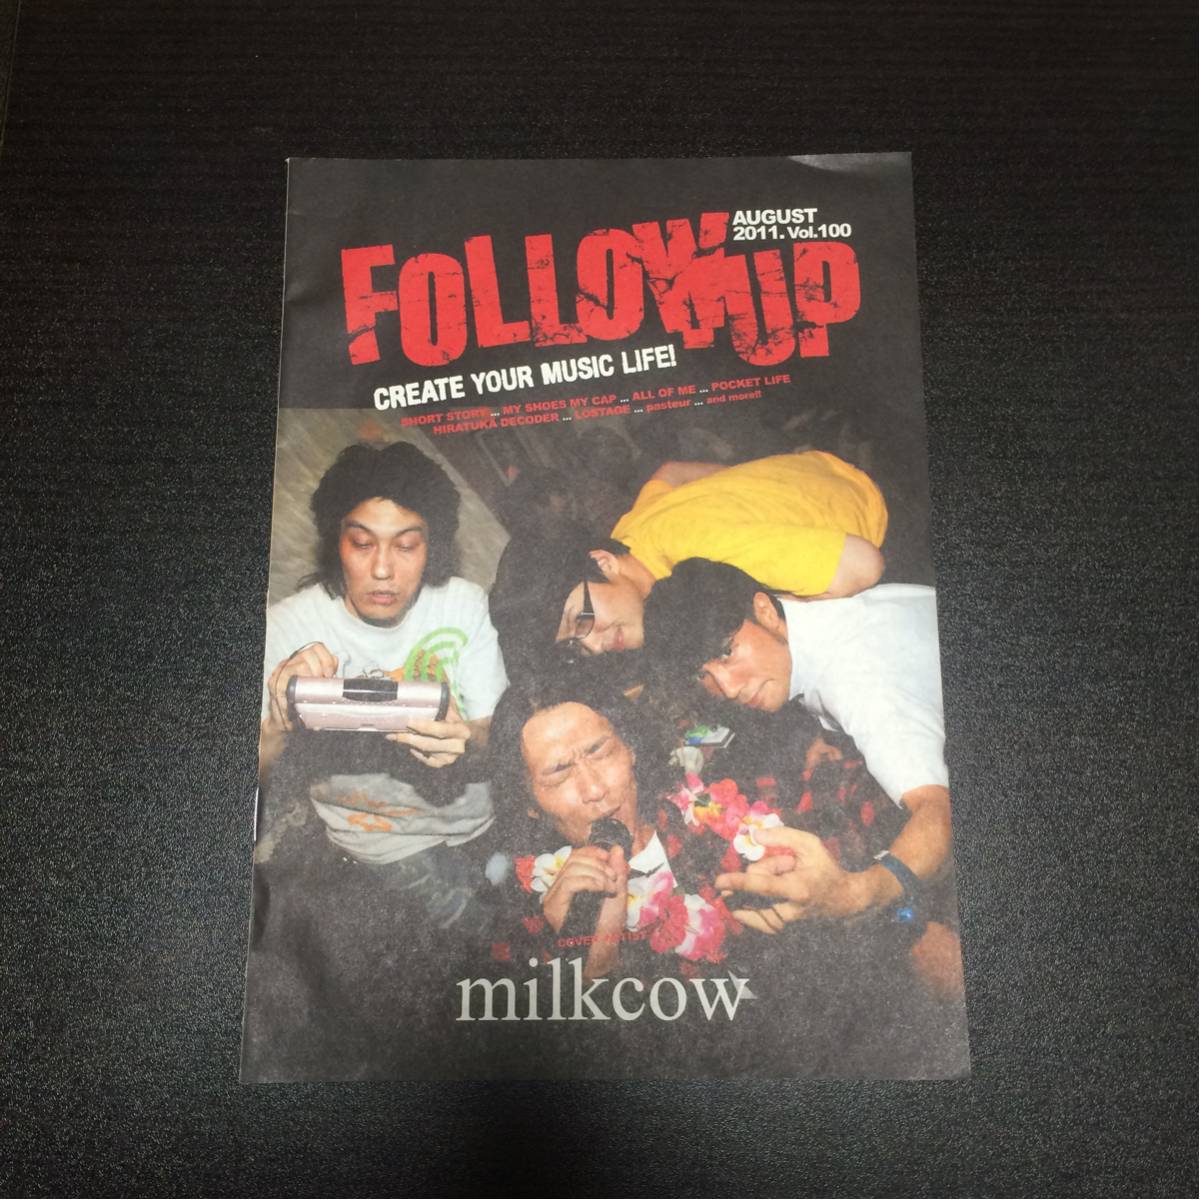 FOLLOW UP vol.100 milkcow/VELTPUNCH/LOSTAGE/THE SLACKERS/HOBBLEDEES/dry as dust/HIRATSUKA DECODER/All of Me/POCKET LIFE 他_画像1